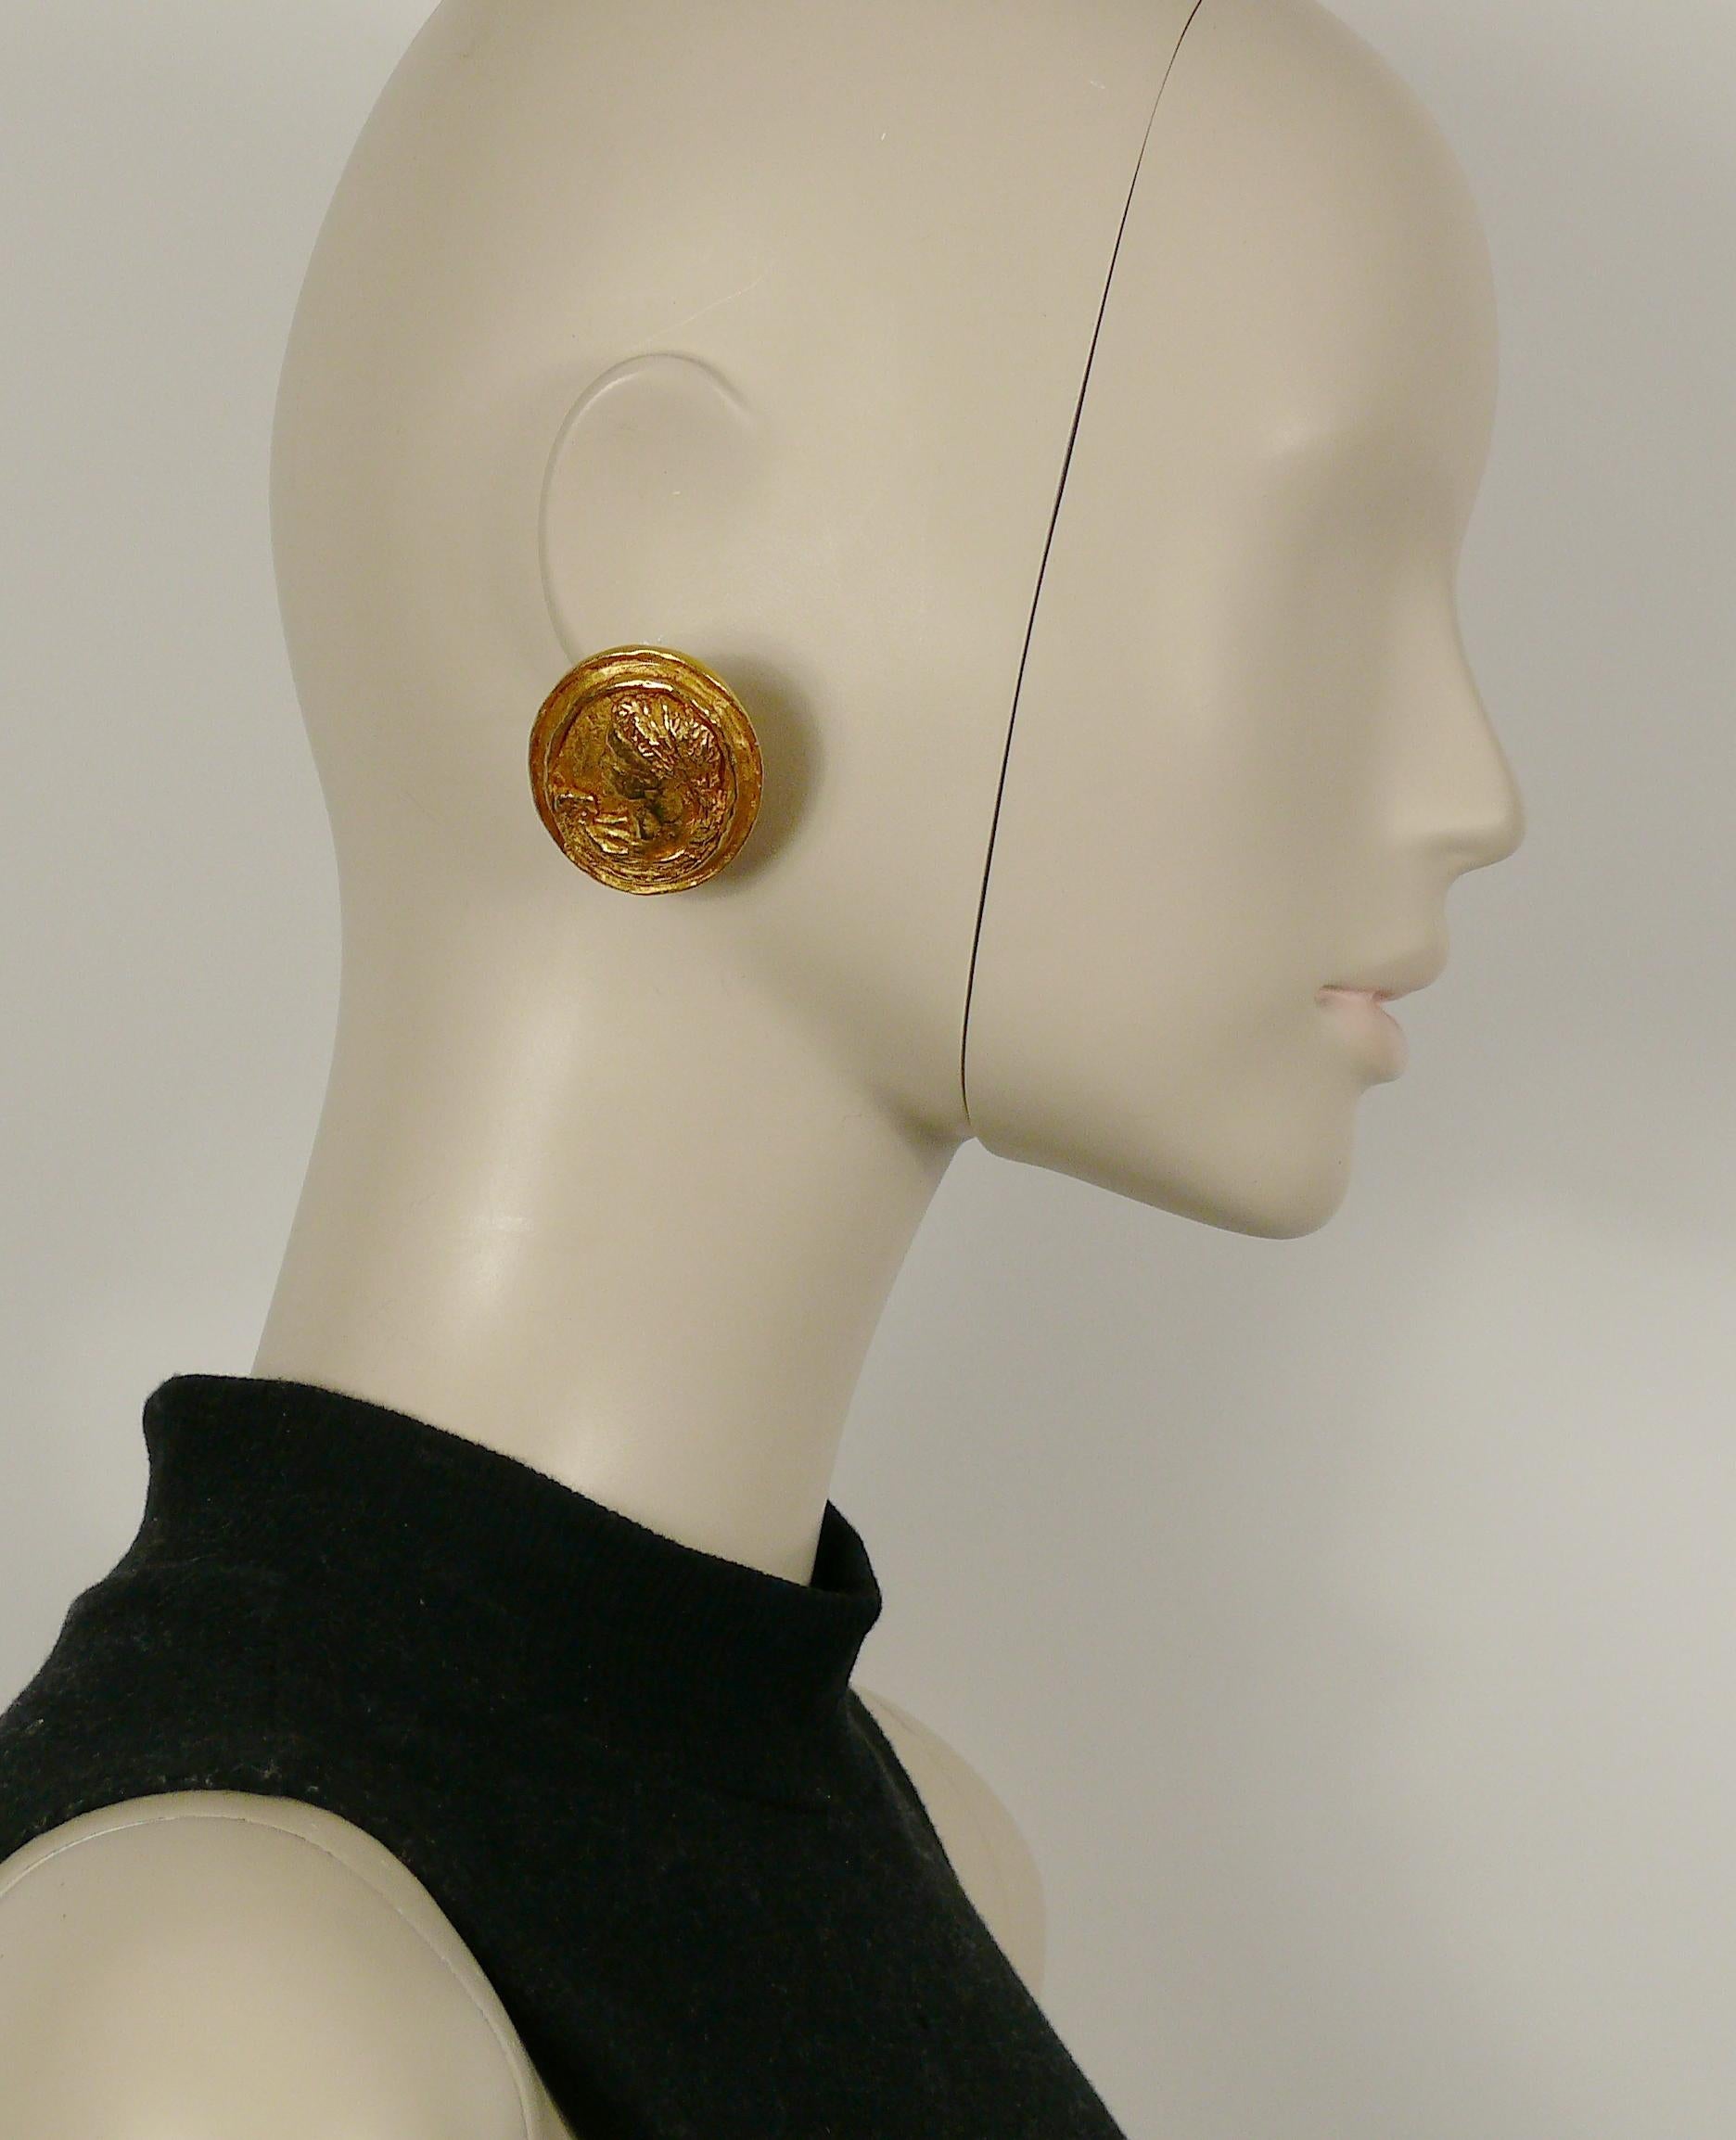 CHRISTIAN LACROIX vintage gold toned raised cameo of Greek Roman profiles.

Marked CHRISTIAN LACROIX CL Made in France.

Indicative measurements : max. approx. 4.1 cm (1.61 inches) x max. approx. 3.2 cm (1.26 inches).

Comes with original dust